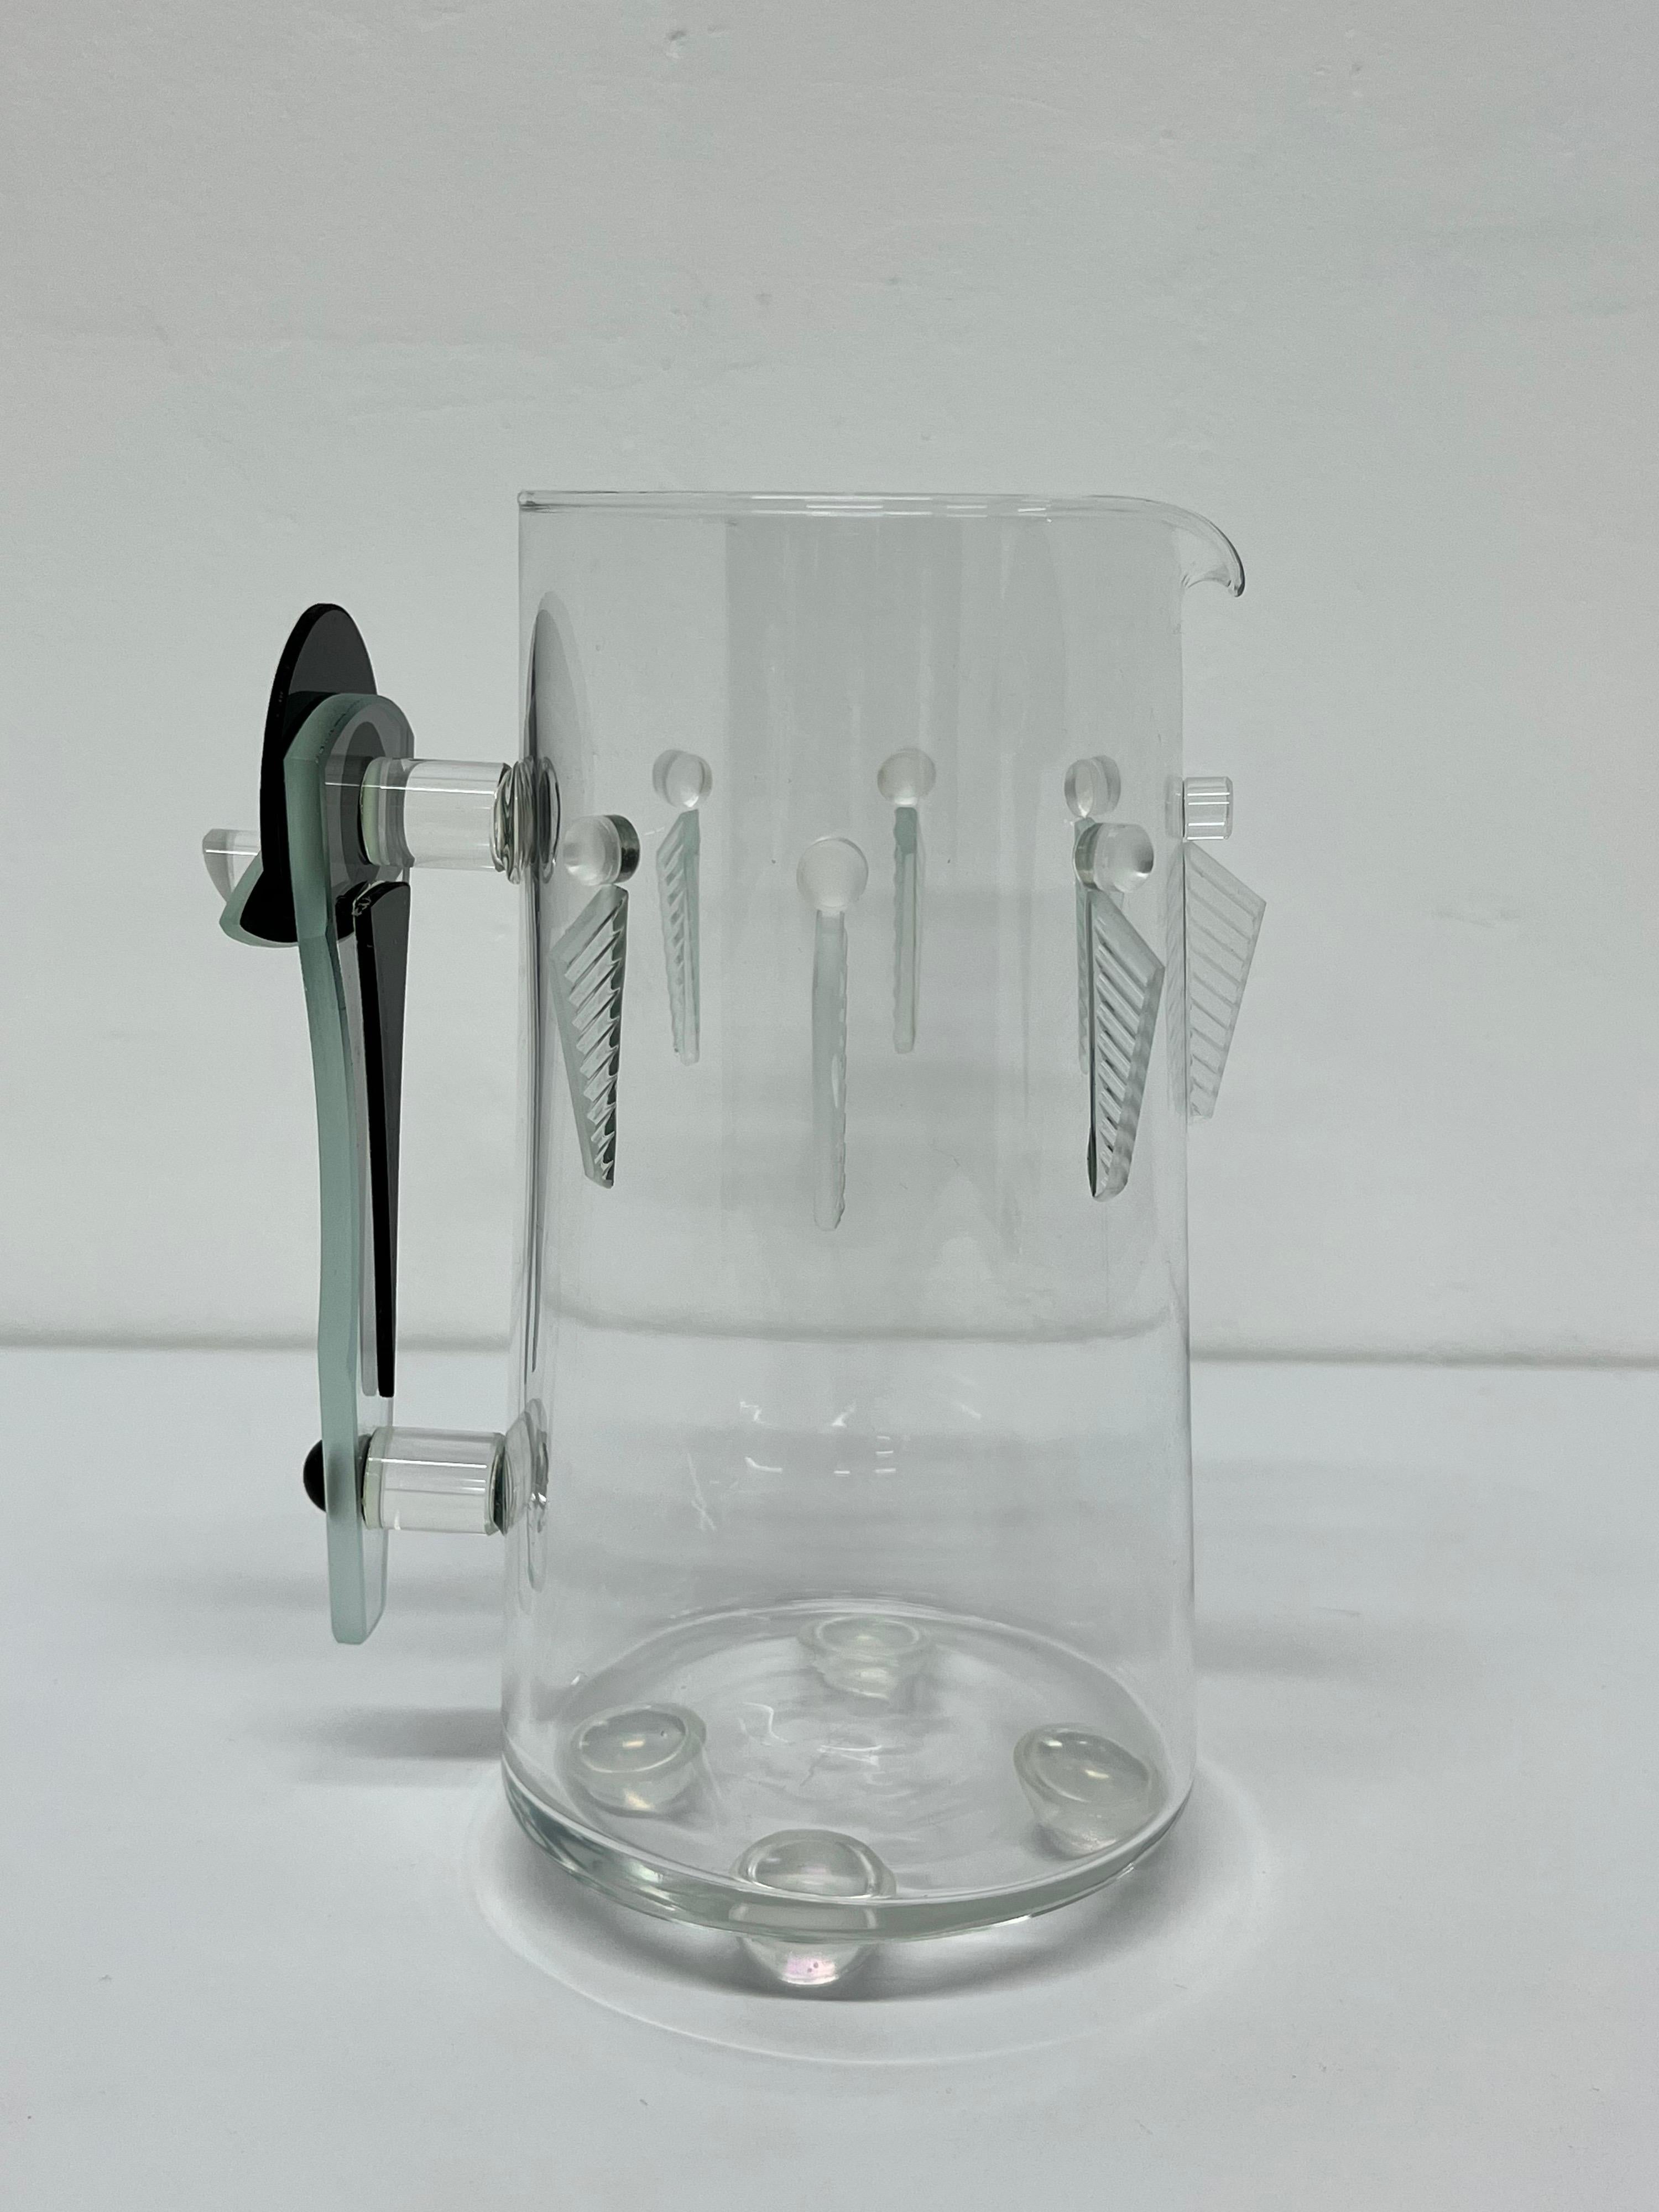 George Ponzini Postmodern Deco Revival Art Glass Pitcher In Good Condition For Sale In Miami, FL